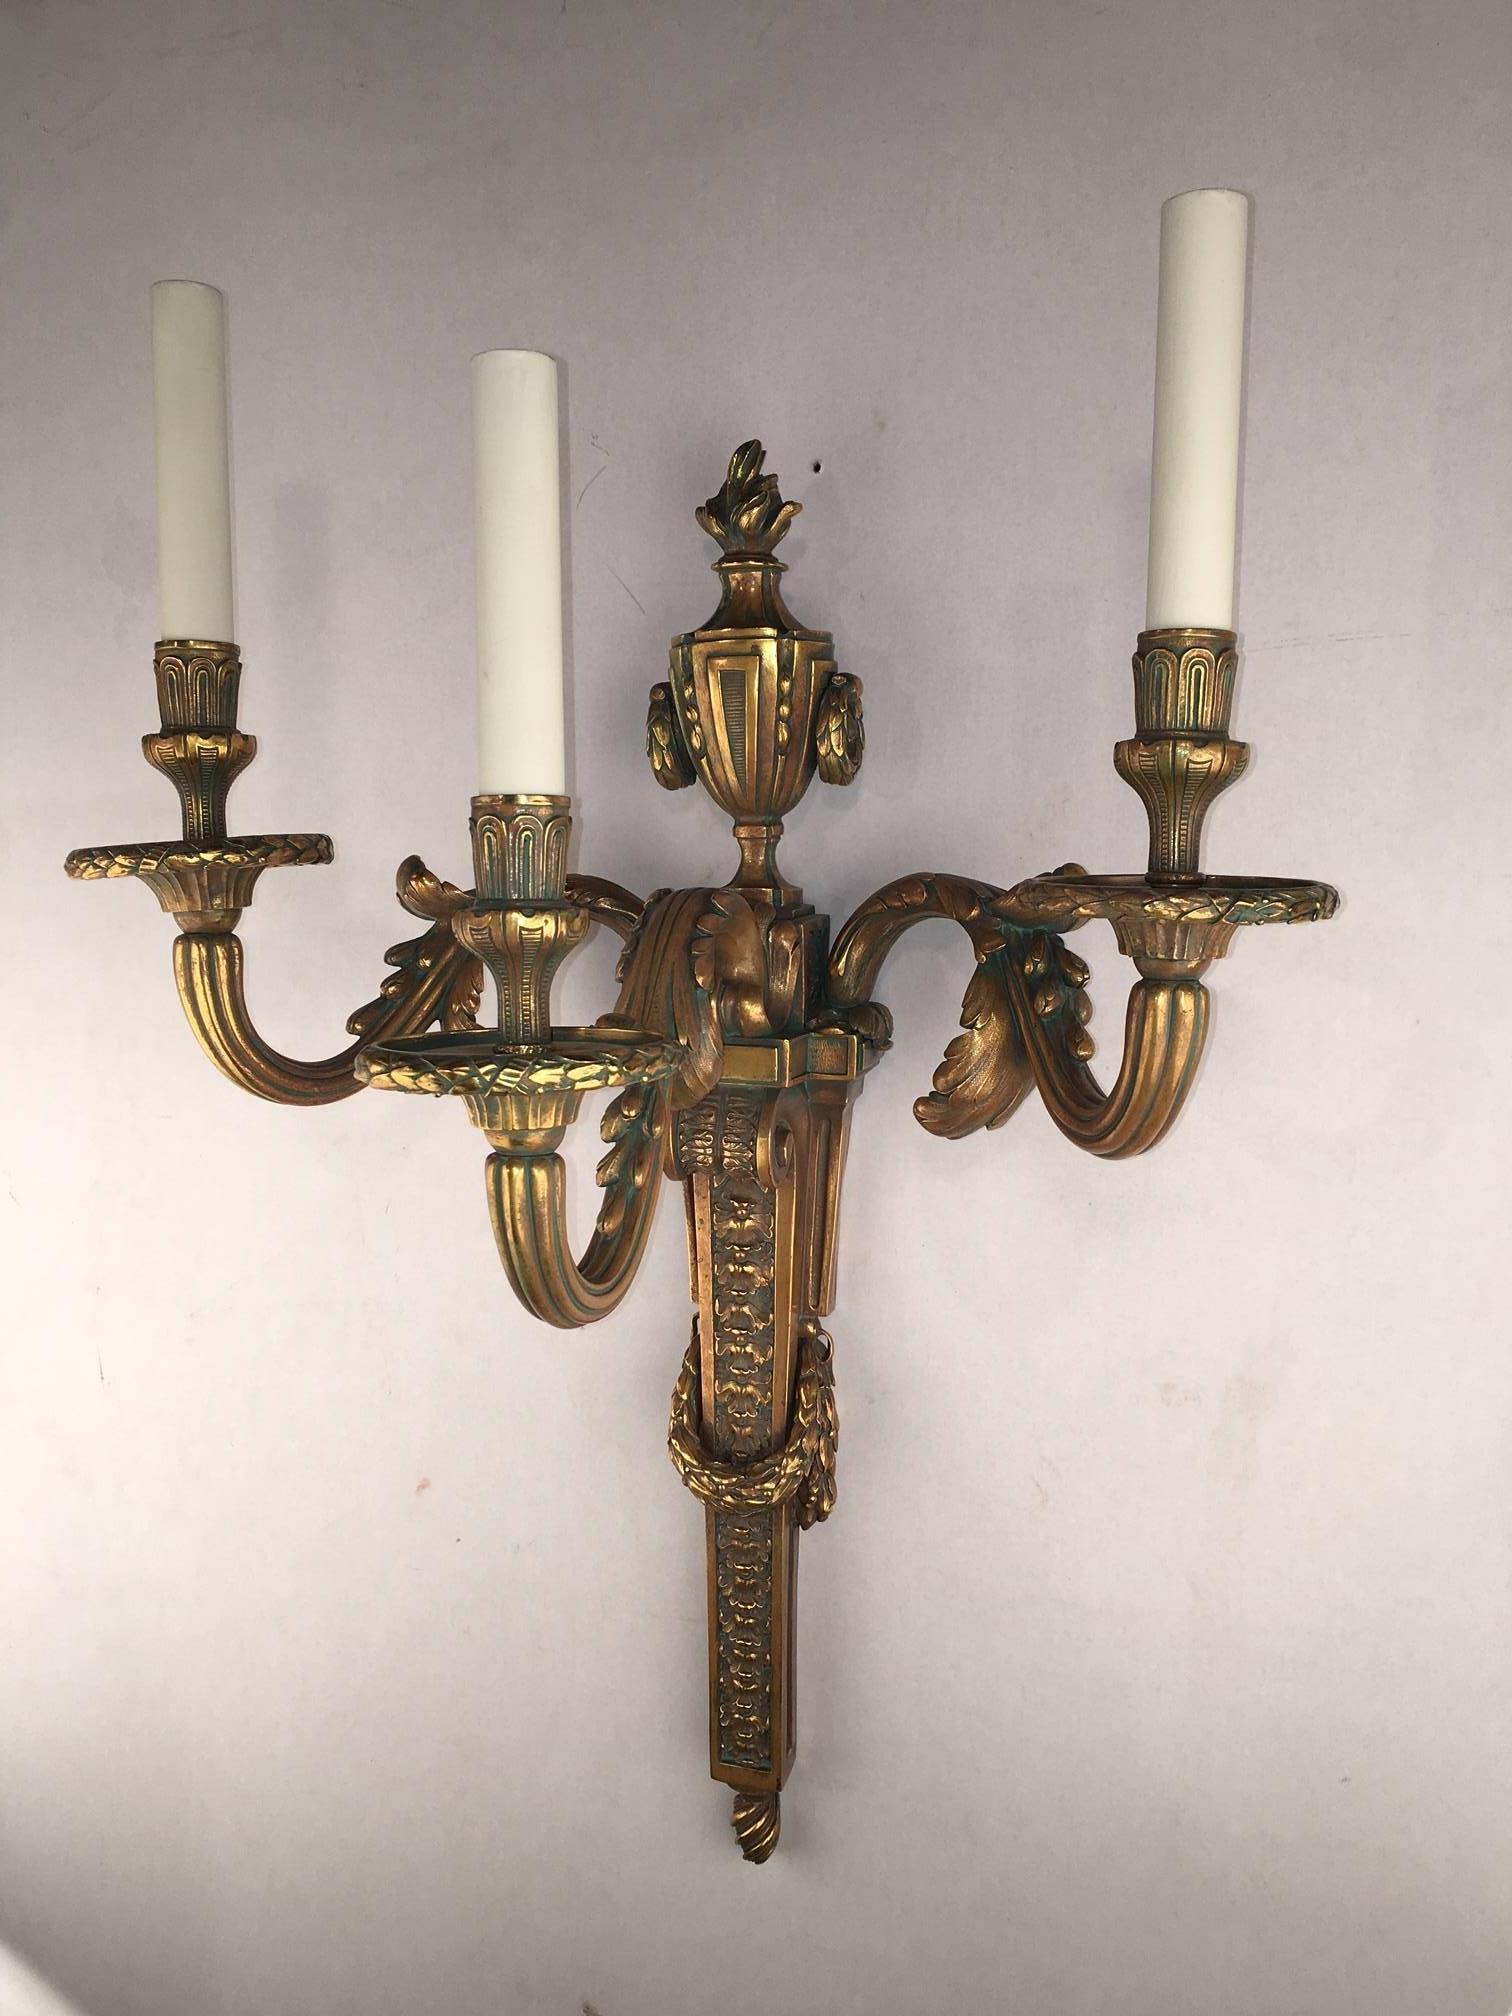 A massive pair of Louis XVI style three light bronze wall sconces, each arm modeled with scrolling acanthus, the back plate with vase-shaped flame finial and of tapering garlanded form cast with leaves and berries.